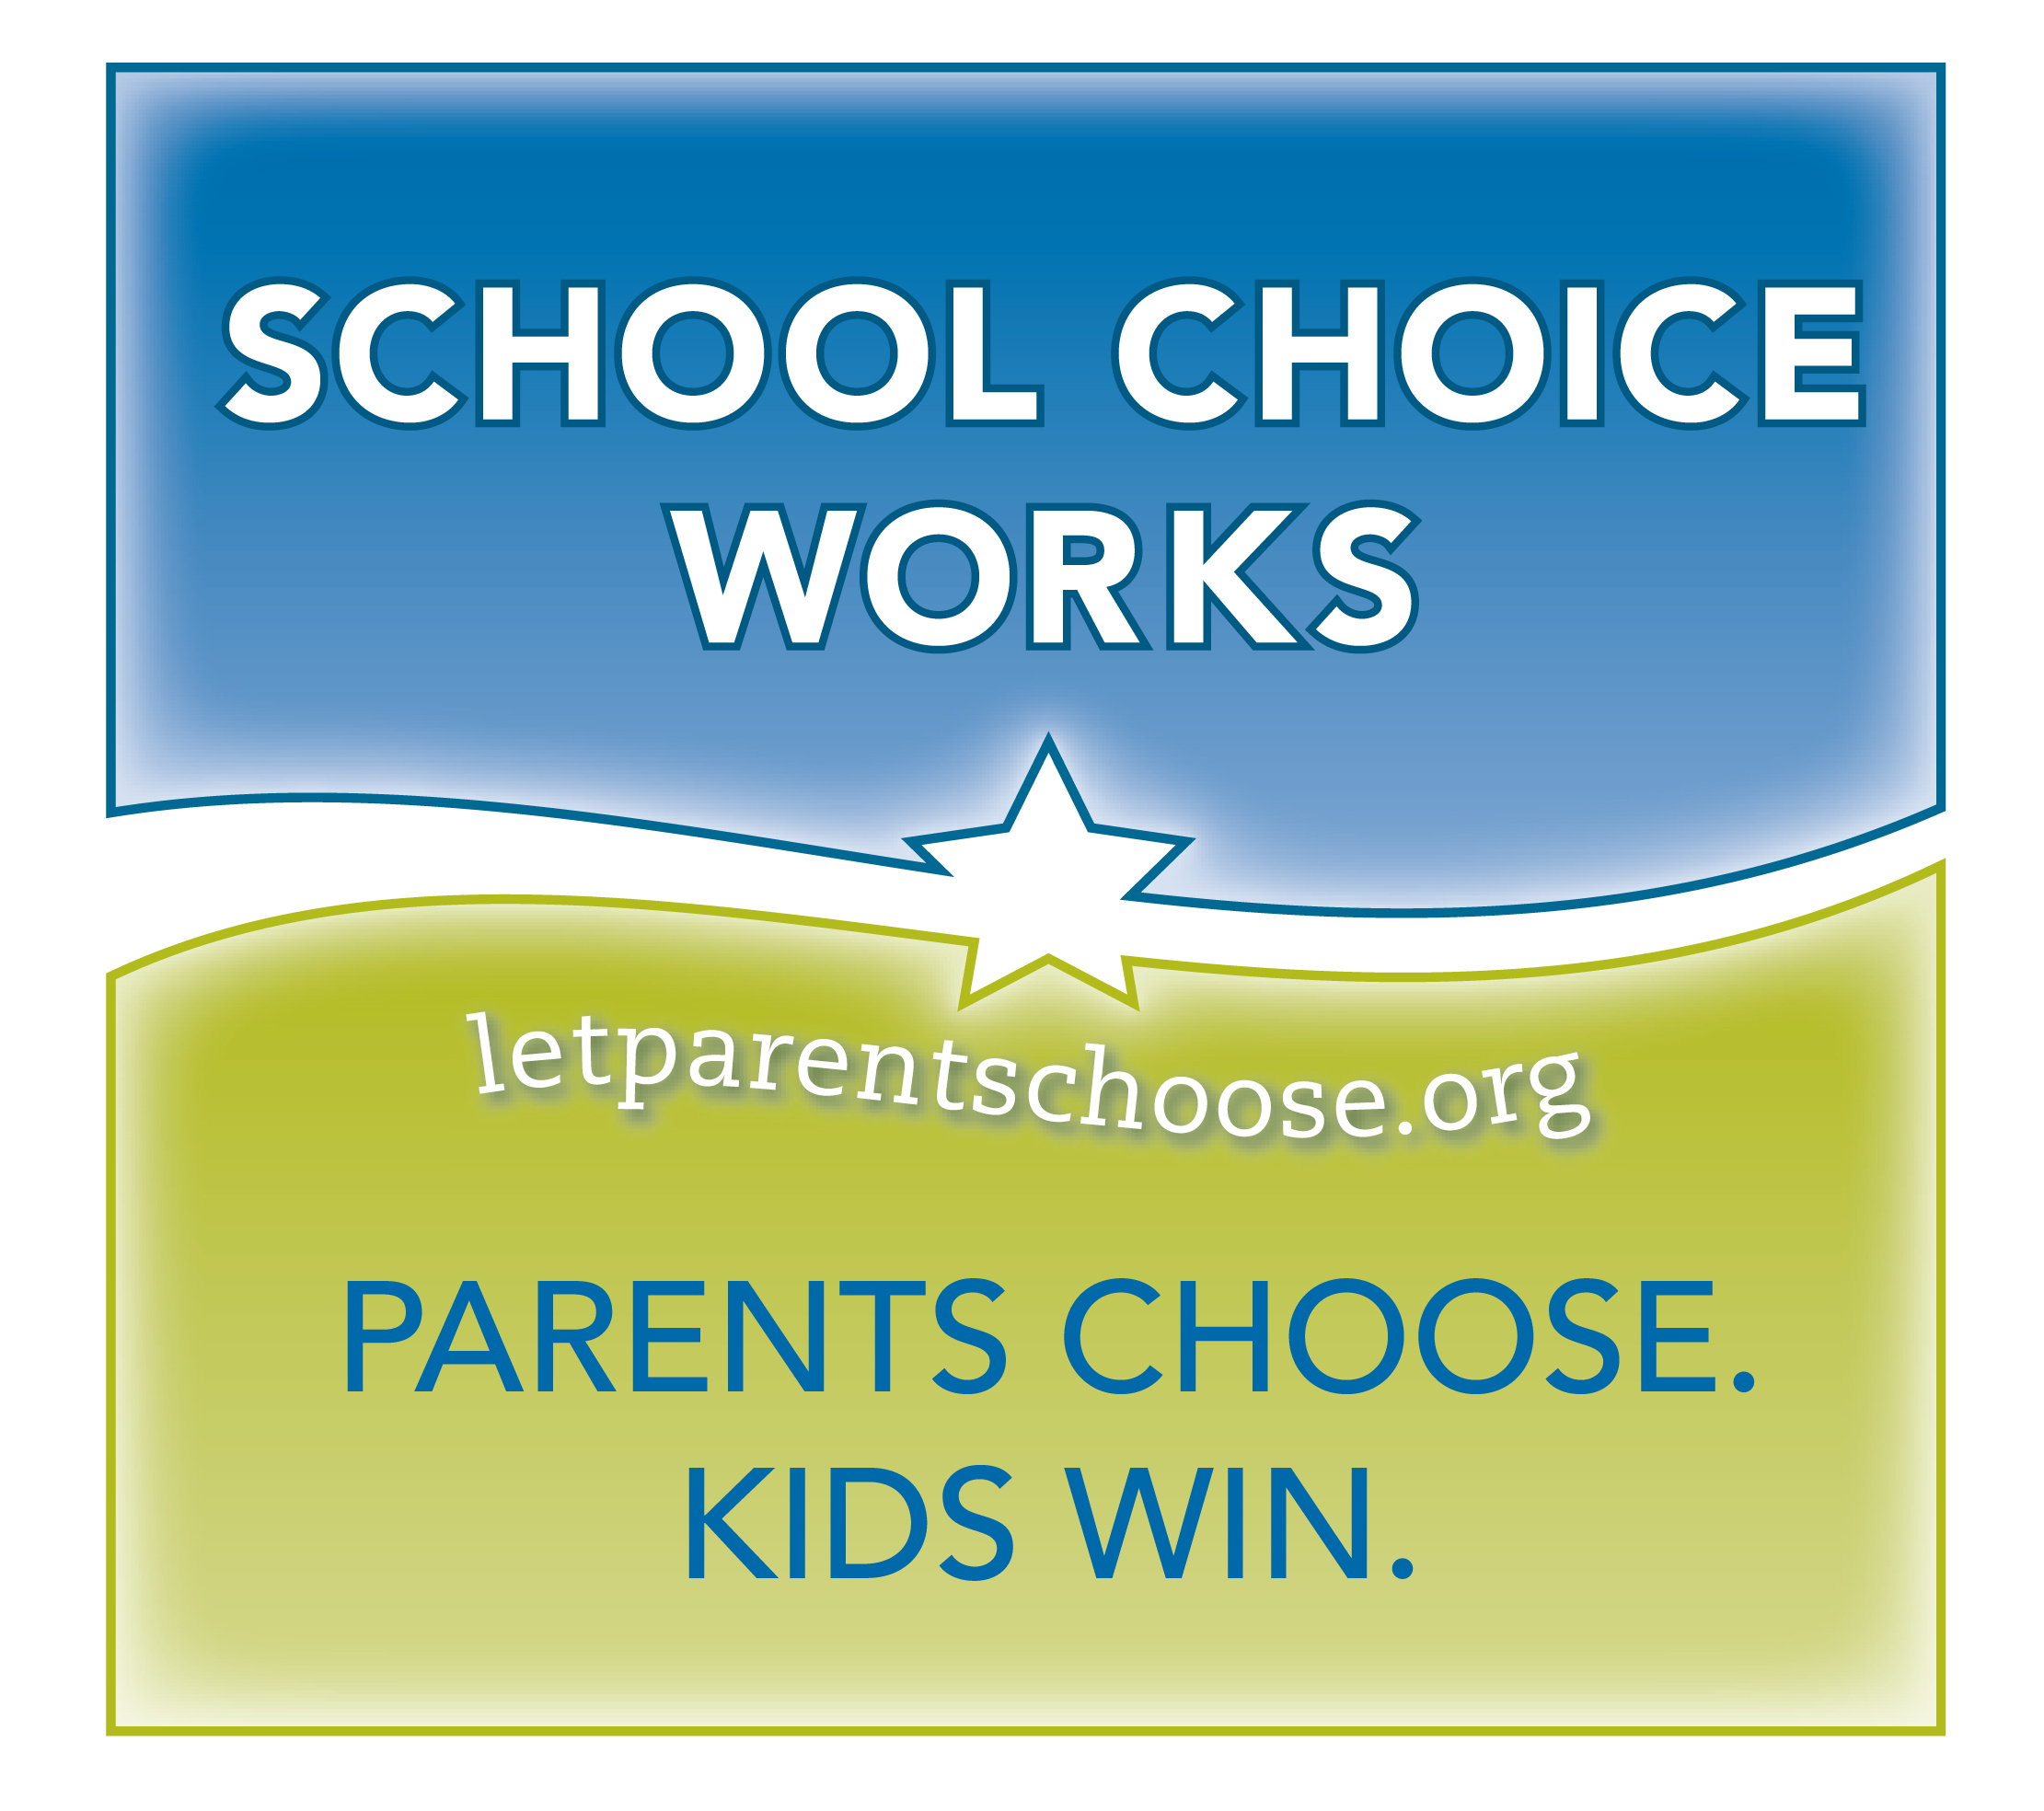 School Choice Movement Launches Major National Campaign to Recruit